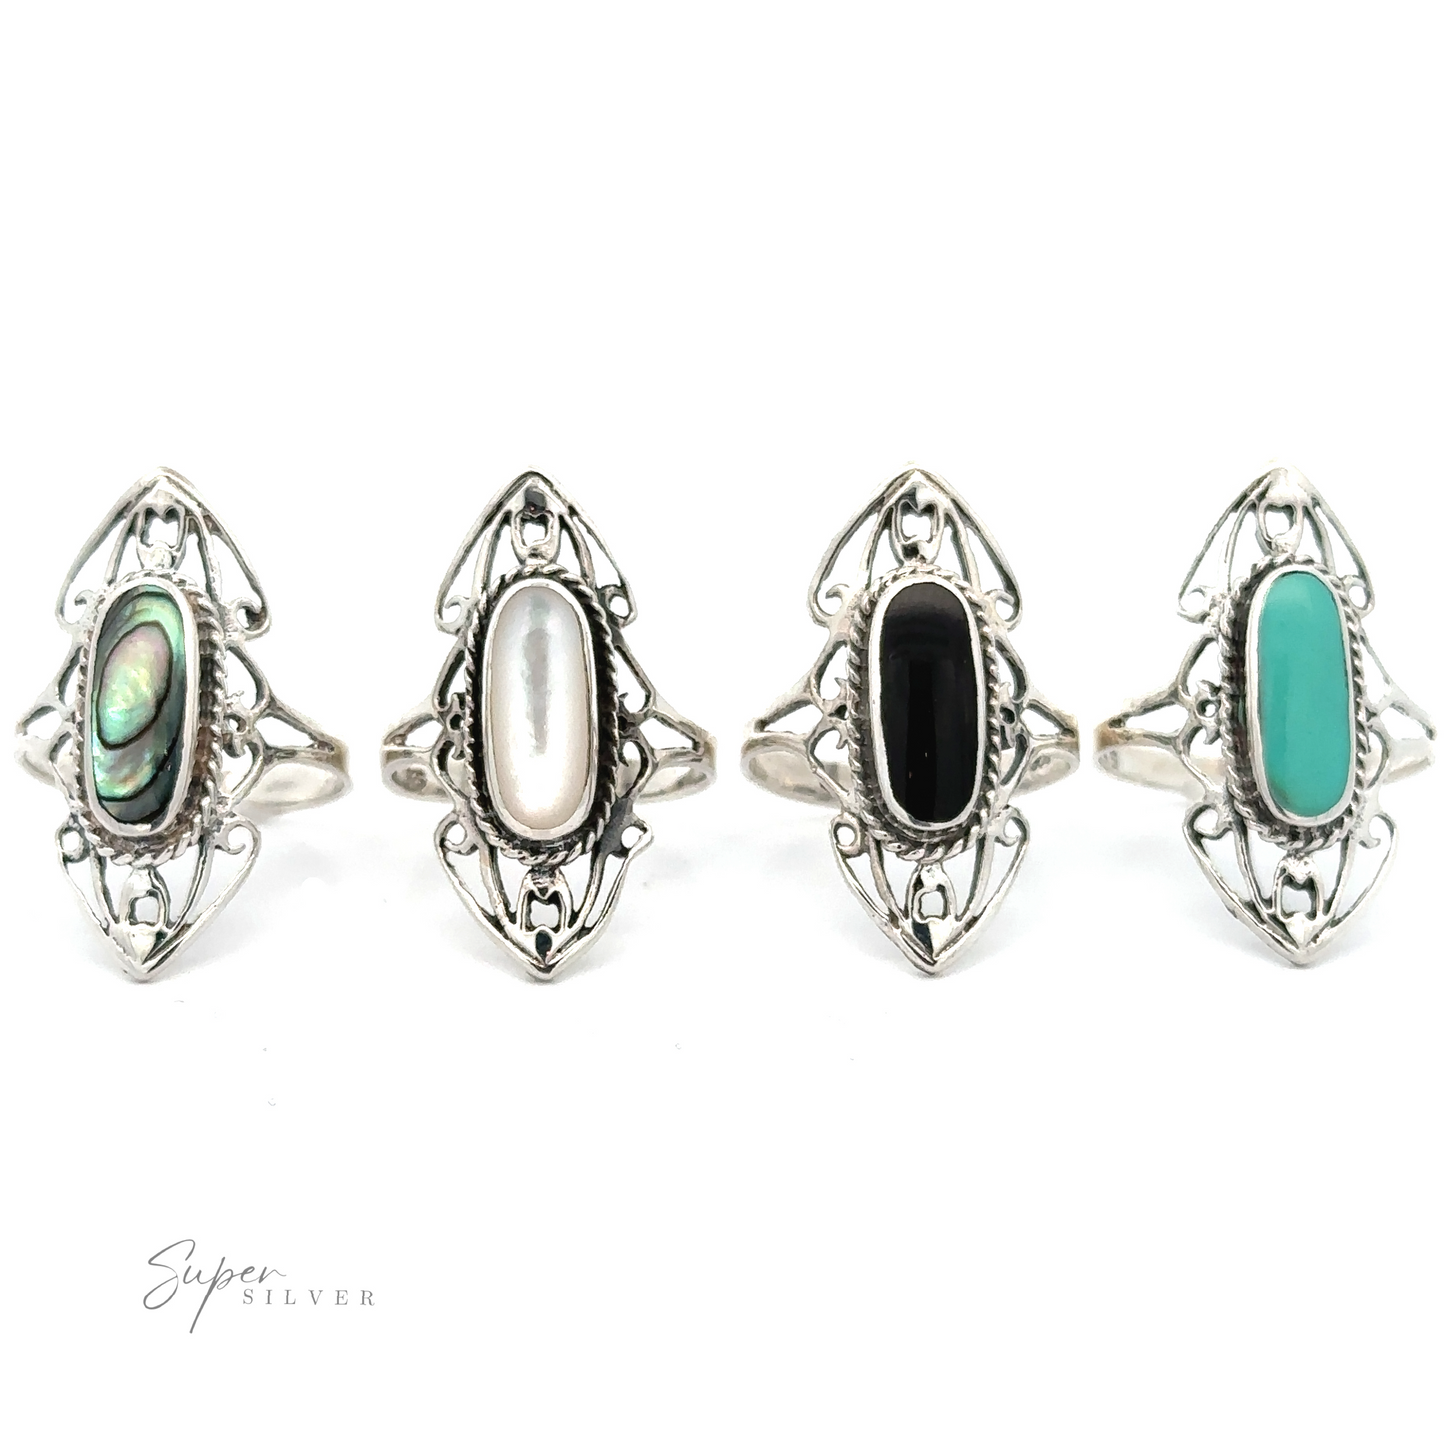 Four sterling silver rings with different colored gemstones displayed side by side, one featuring an Elongated Filigree Ring With Oval Inlaid Stone that adds a touch of boho chic.